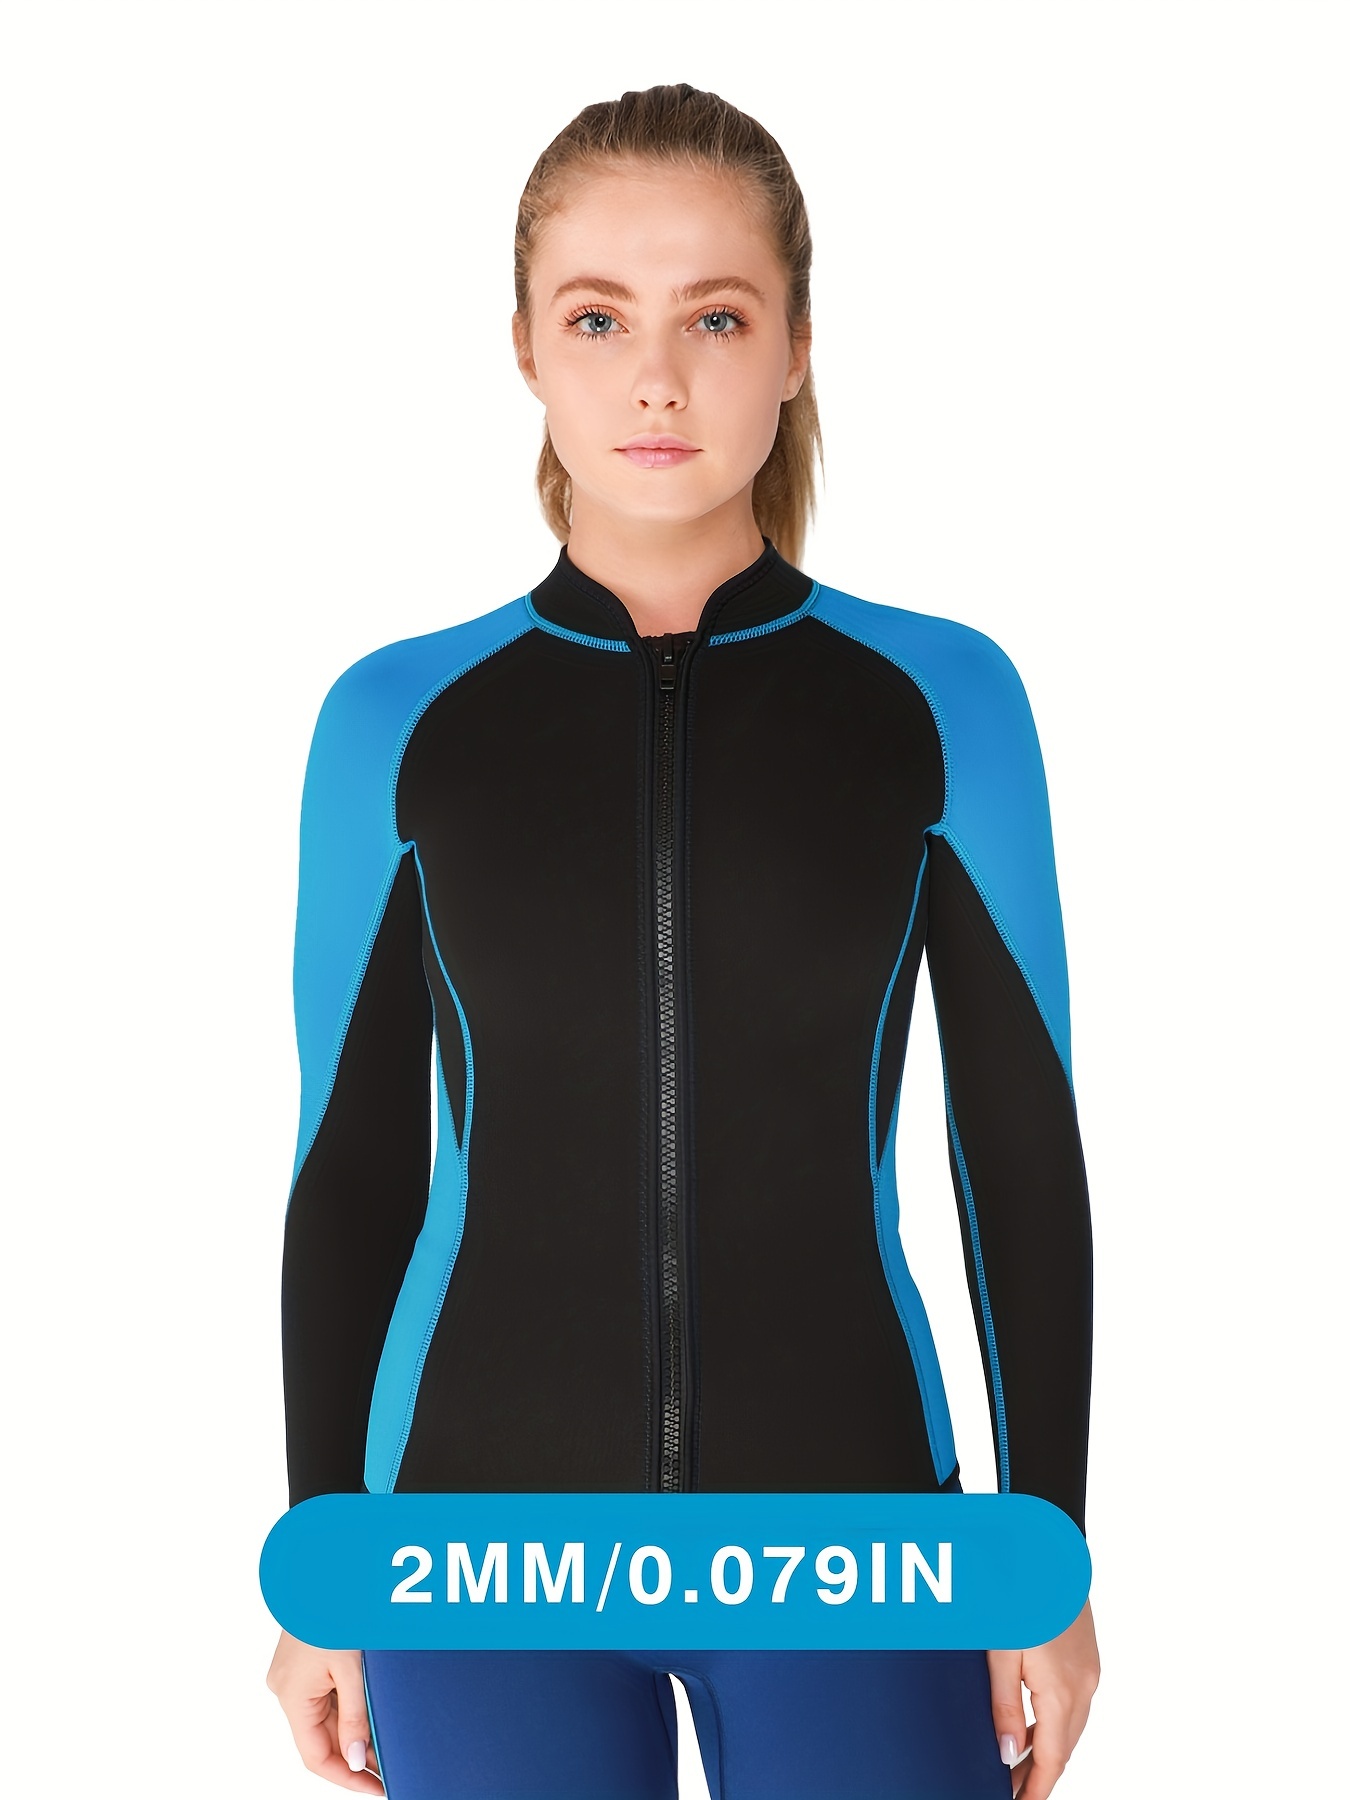 REALON Wetsuit Women Neoprene Wet Suits 3mm Full Body Long Sleeves Swimsuit  For Scuba Diving Swimming Surfing Adult In Cold Water Aerobics